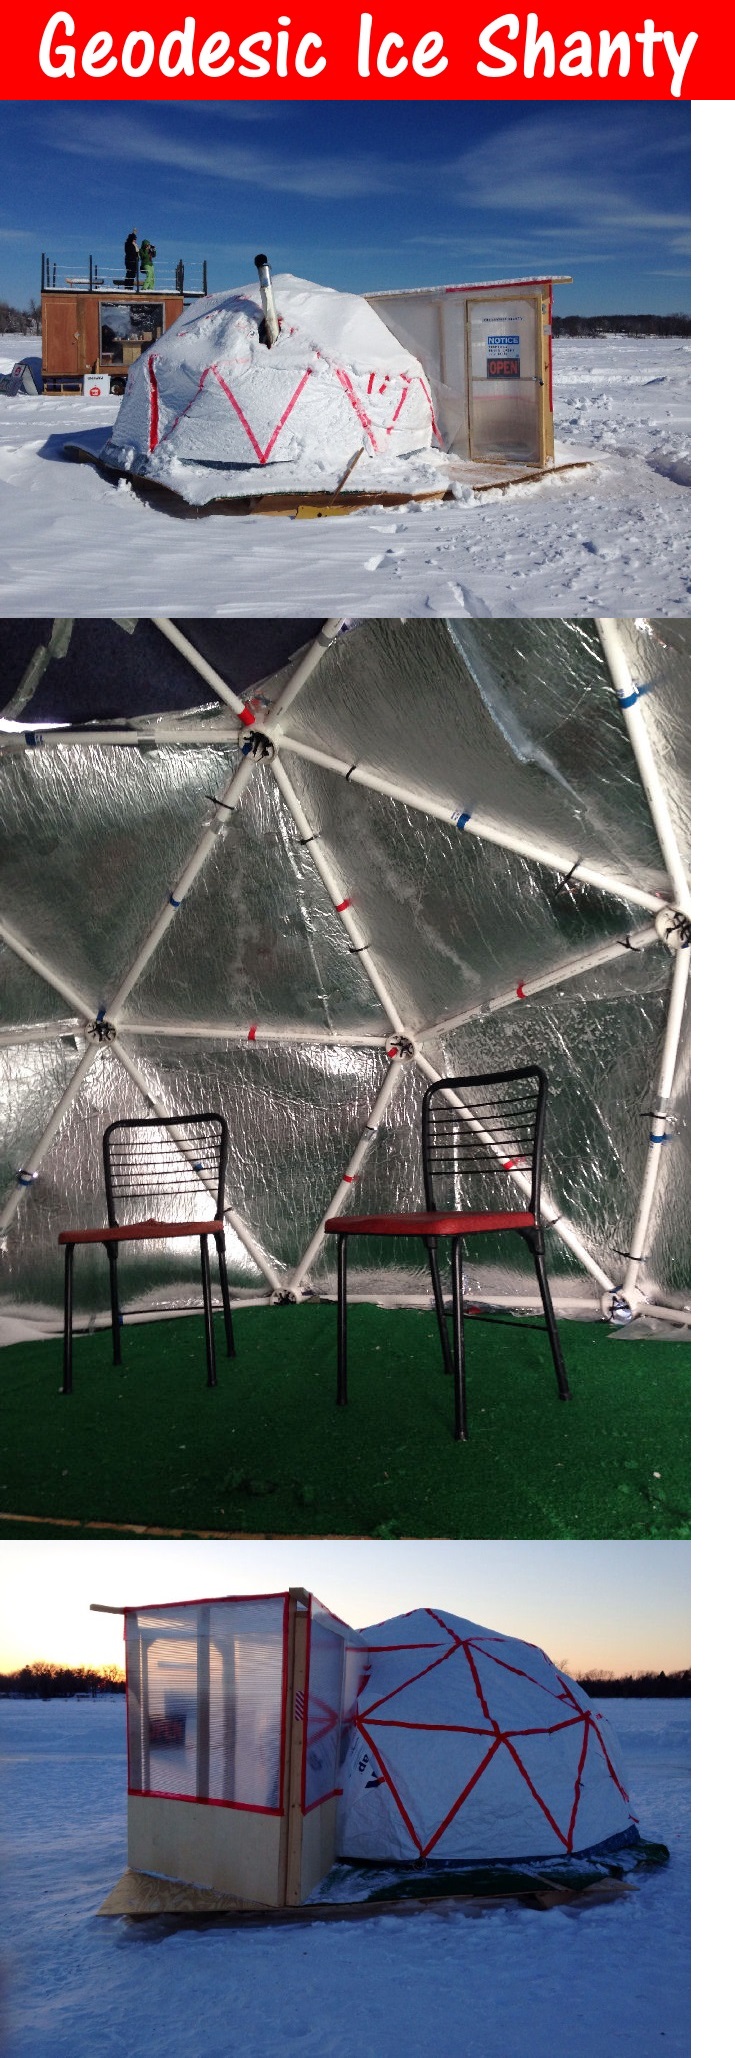 Allyson Packer - Customer Reviews of Our Geodesic Domes for an Ice